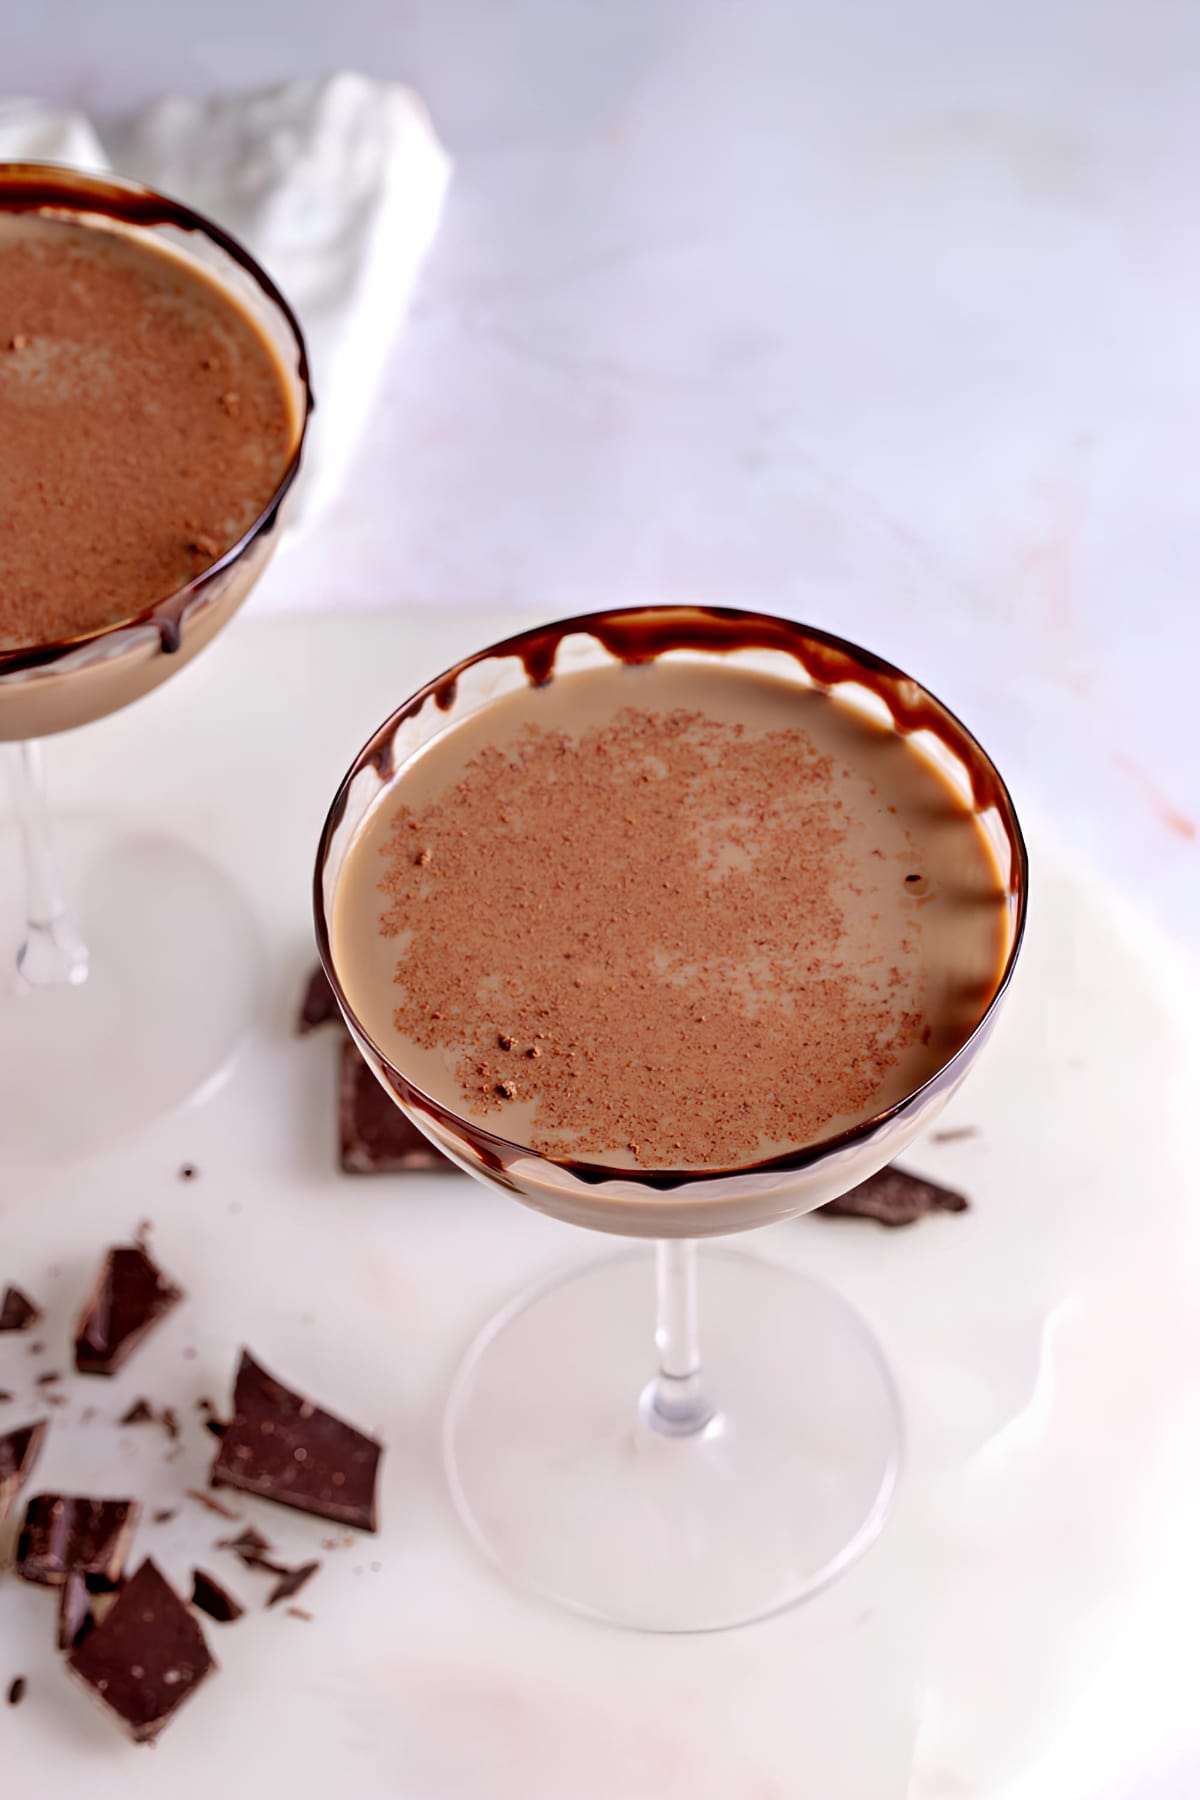 Top view of chocolate martini served on chocolate syrup rimmed cocktail glass. 